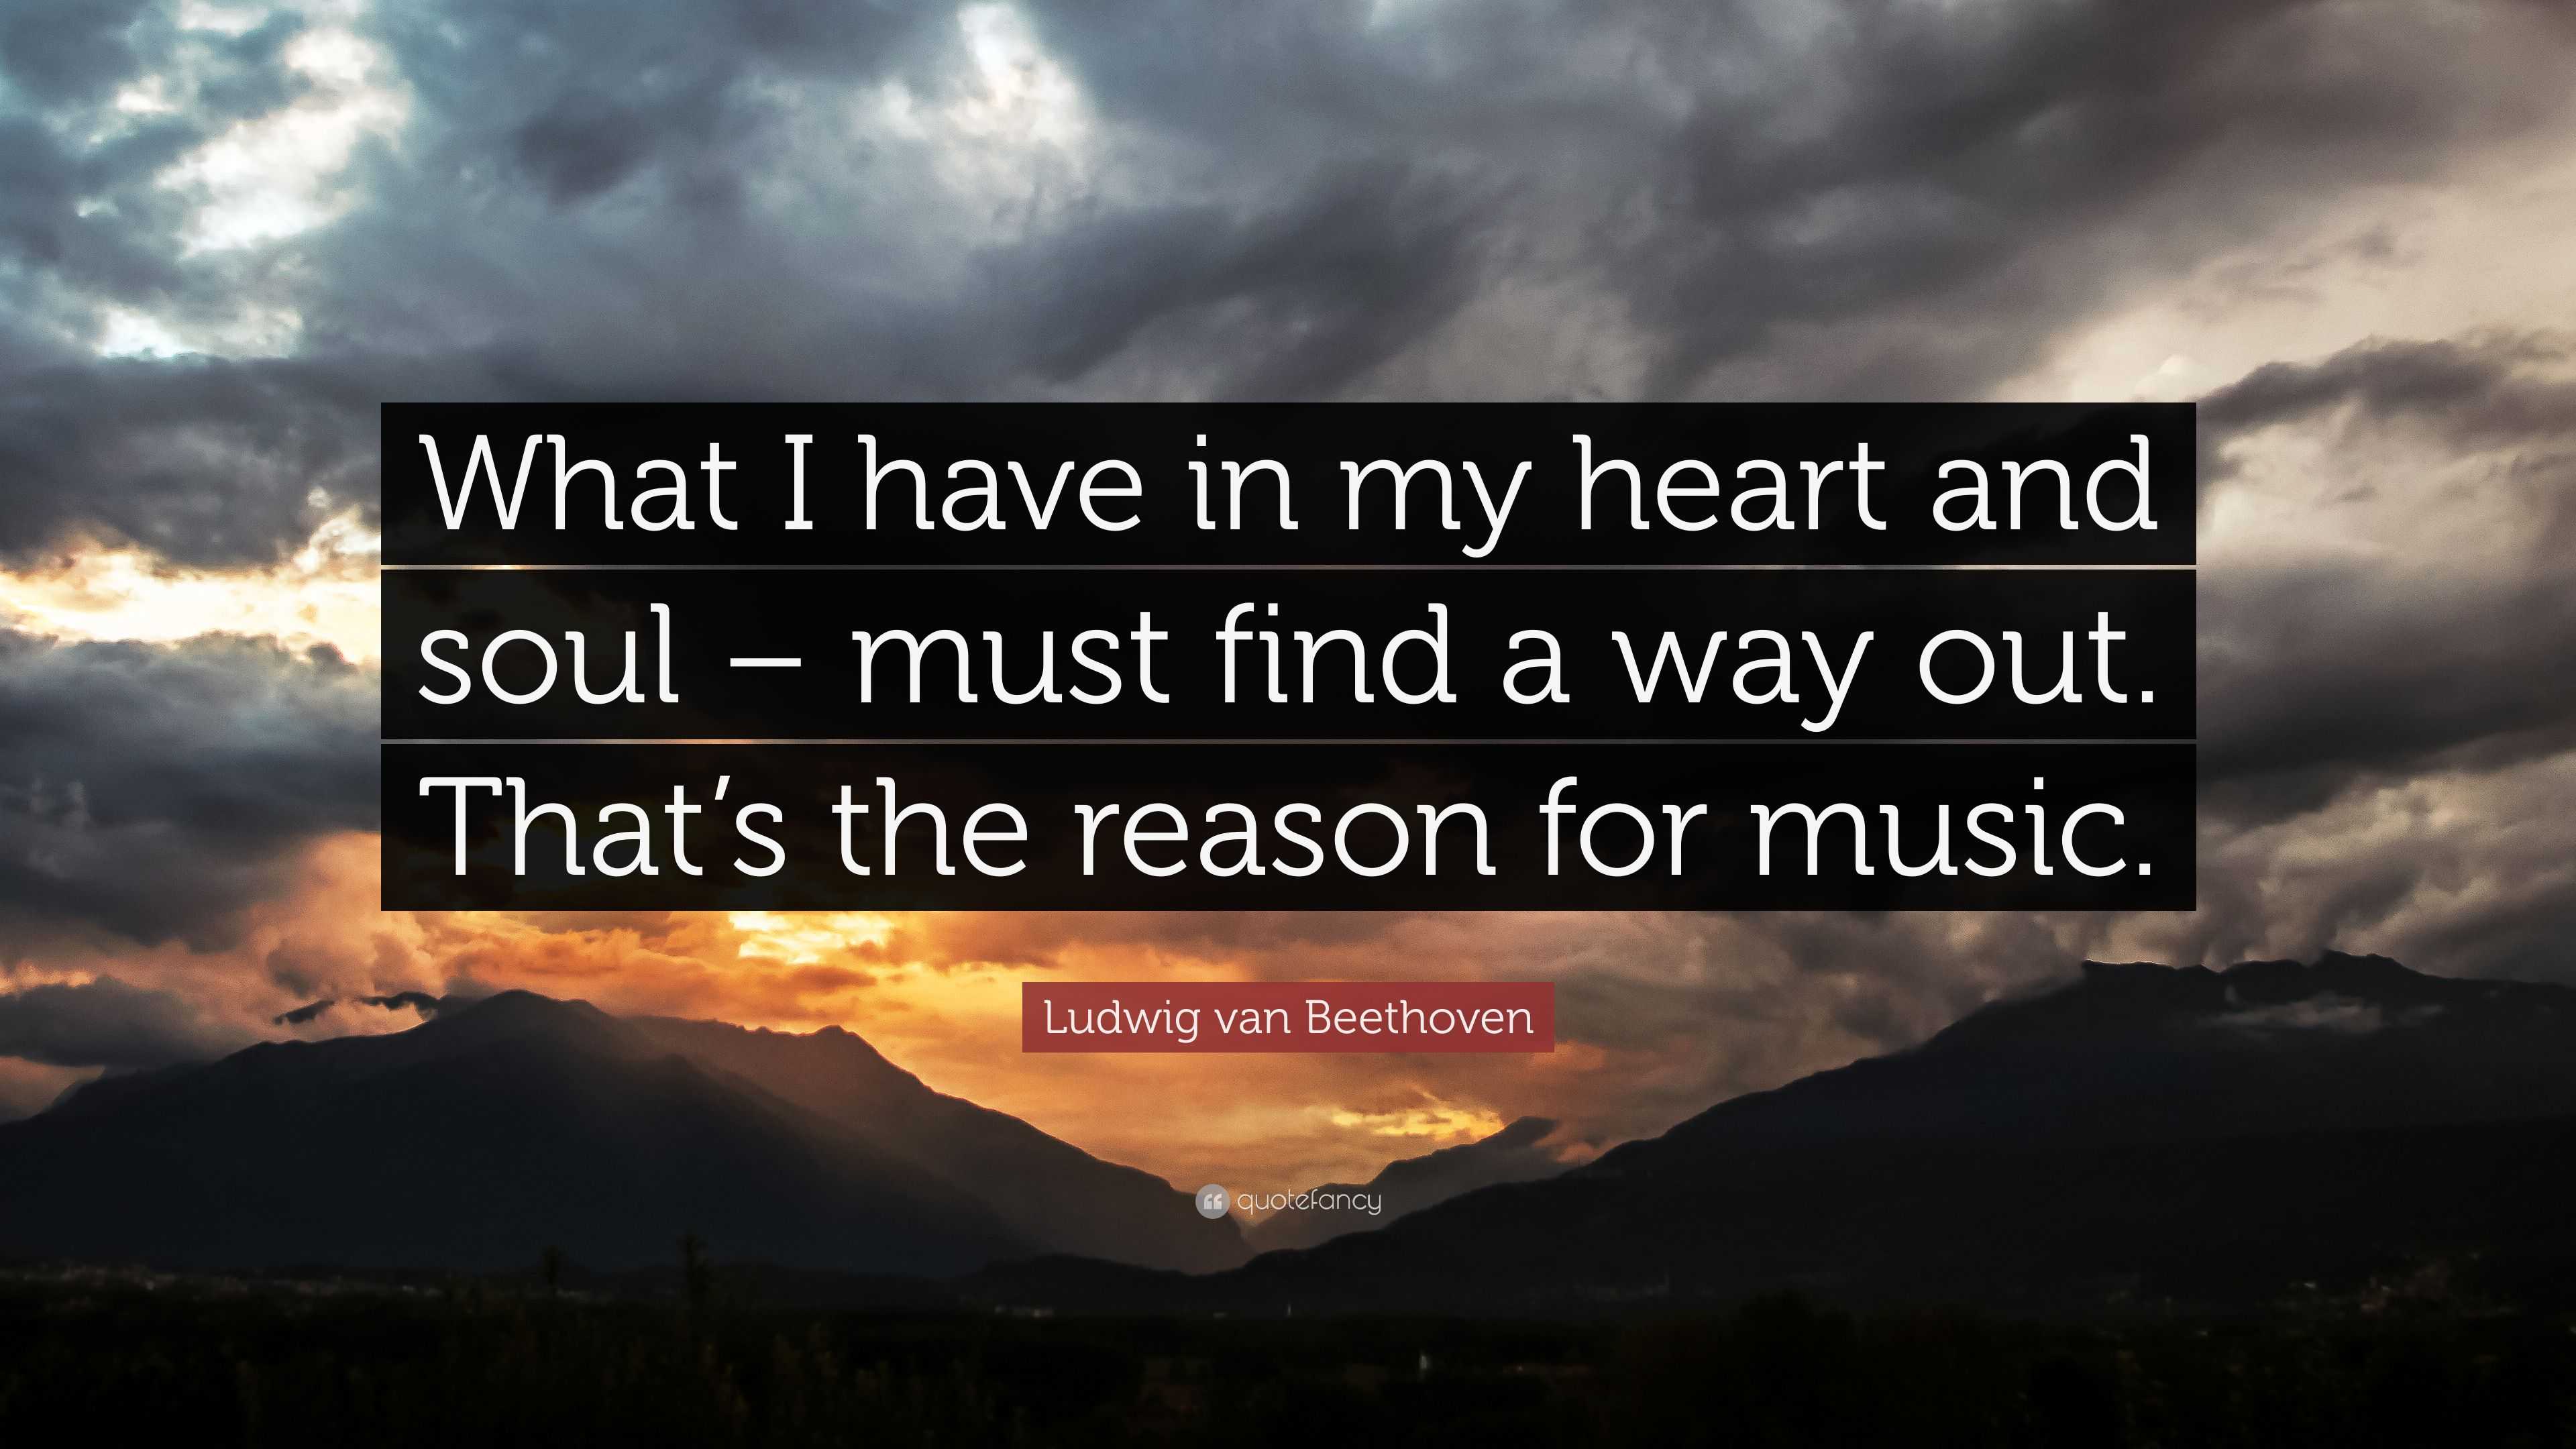 Ludwig van Beethoven Quote “What I have in my heart and soul – must